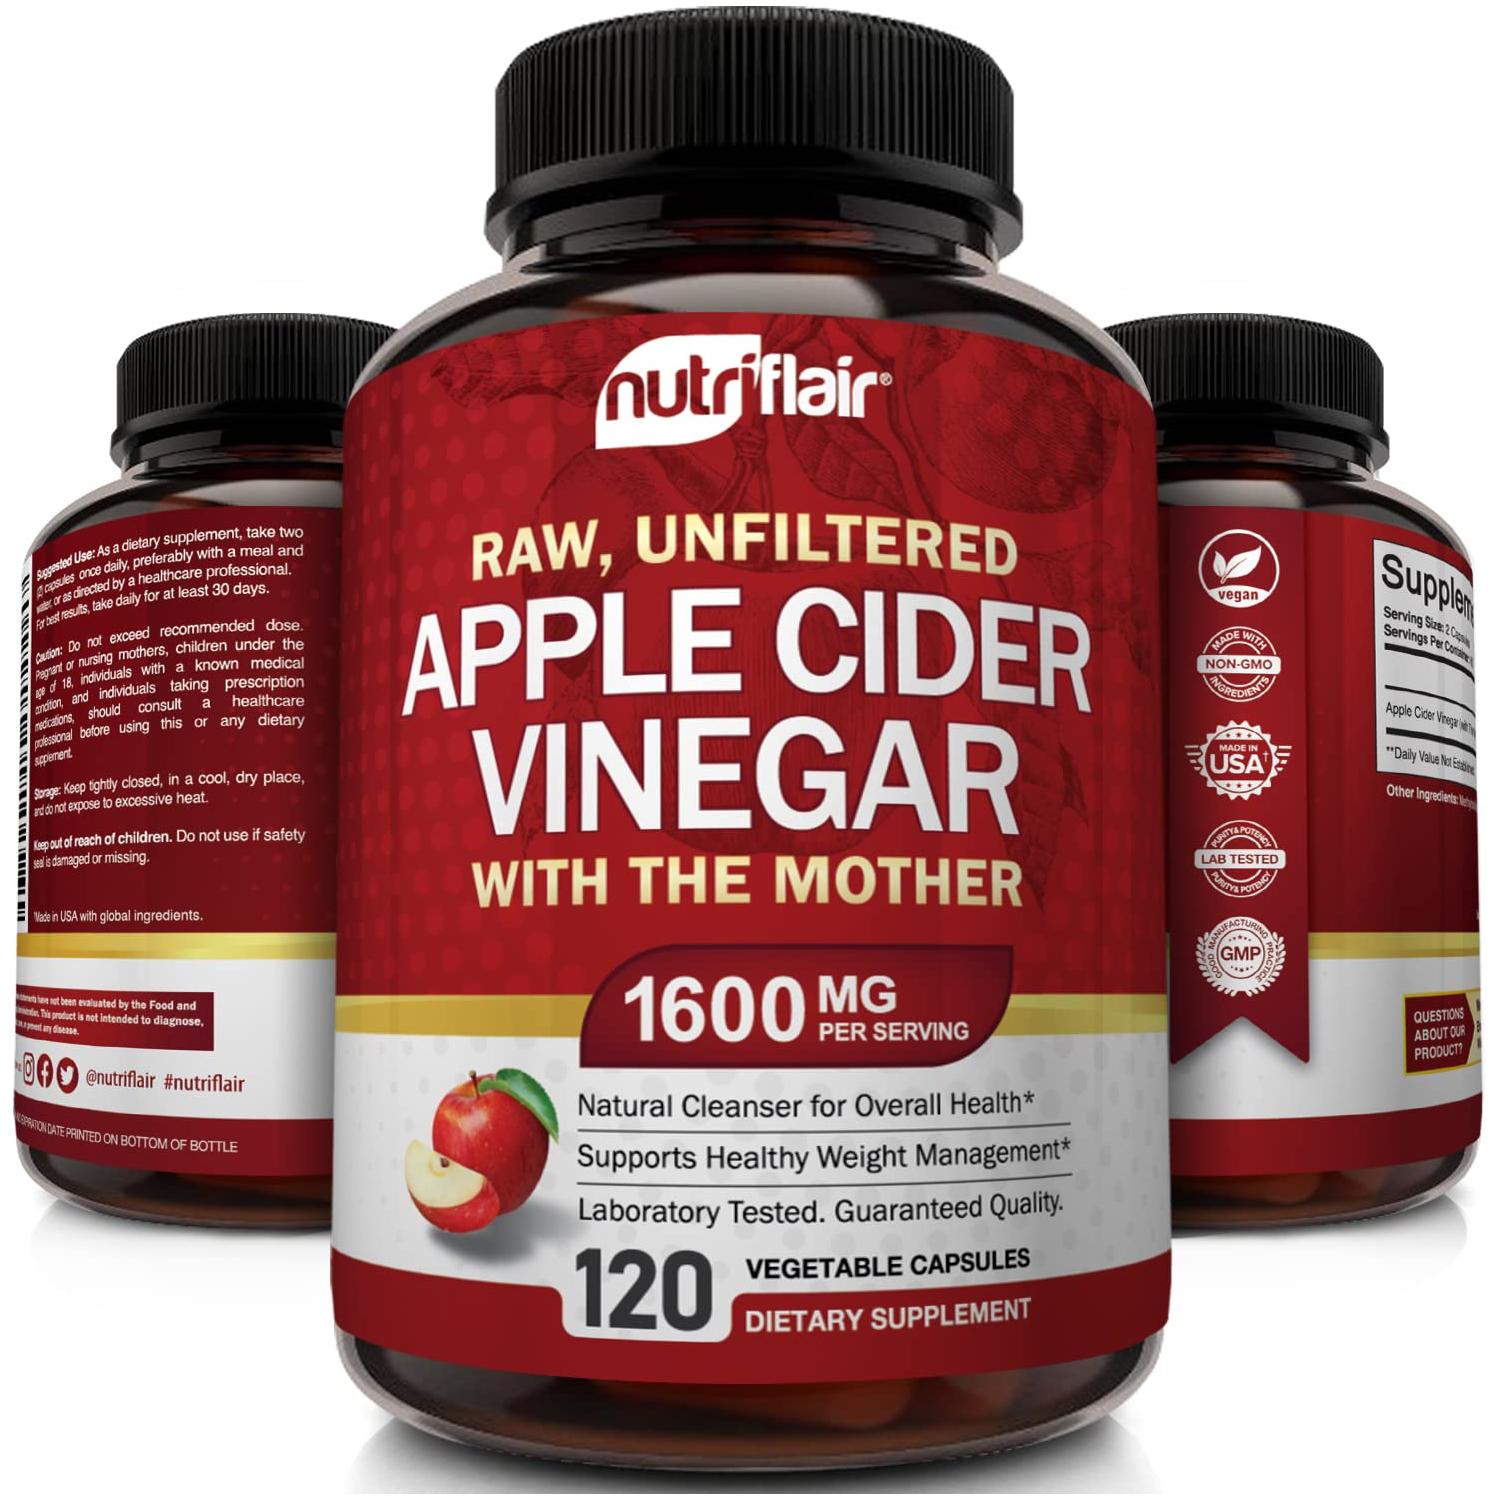 Apple Cider Vinegar Capsules with The Mother - 120 Vegan ACV Pills - Best Supplement for Healthy Weight Loss, Diet, Keto, Digestion, Detox, Immune - Powerful Cleanser &amp; Appetite Suppressant Non-GMO